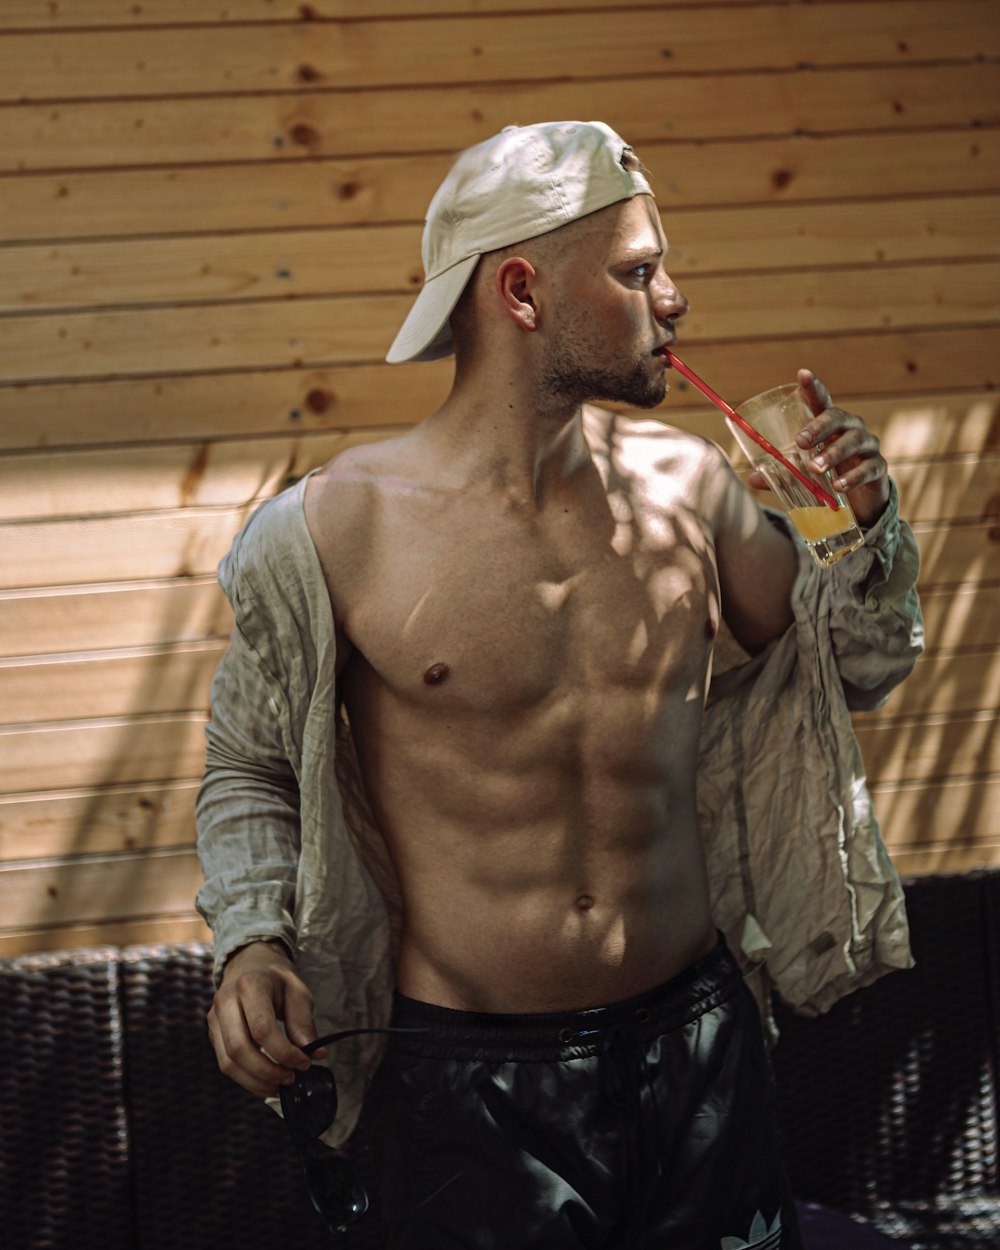 a shirtless man drinking a drink from a straw